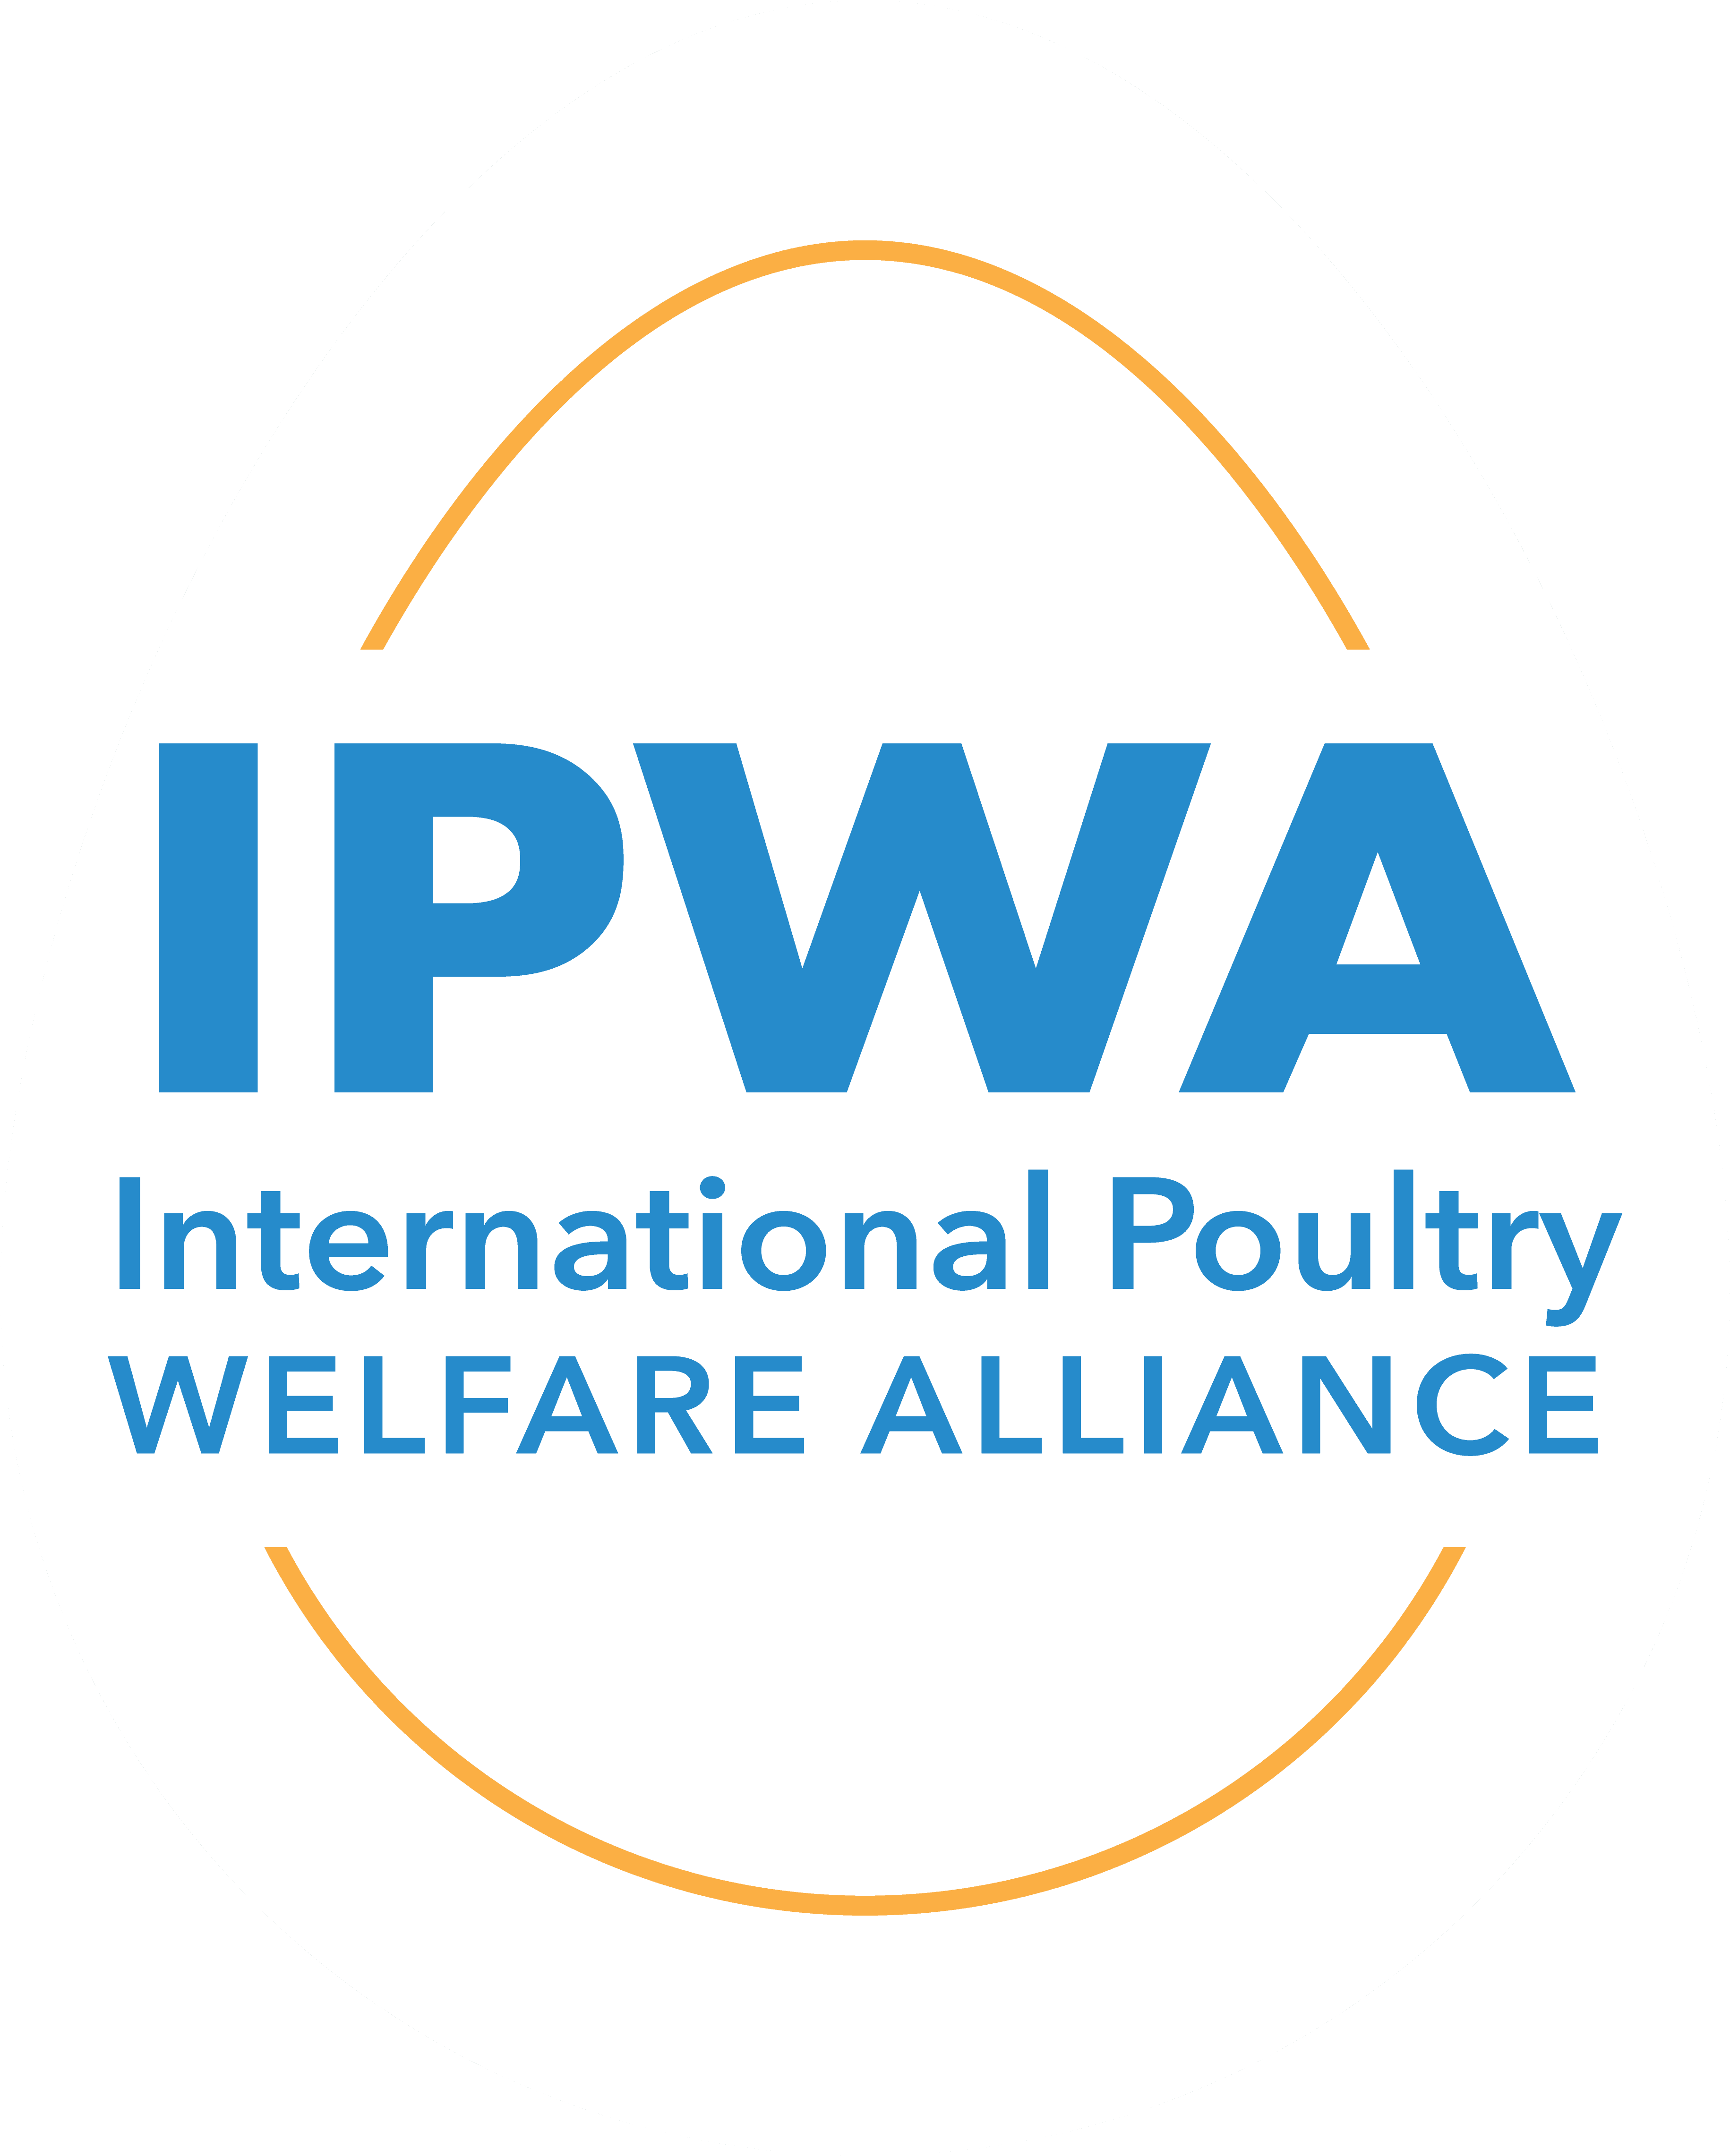 This is the logo for International Poultry Welfare Alliance (IPWA).